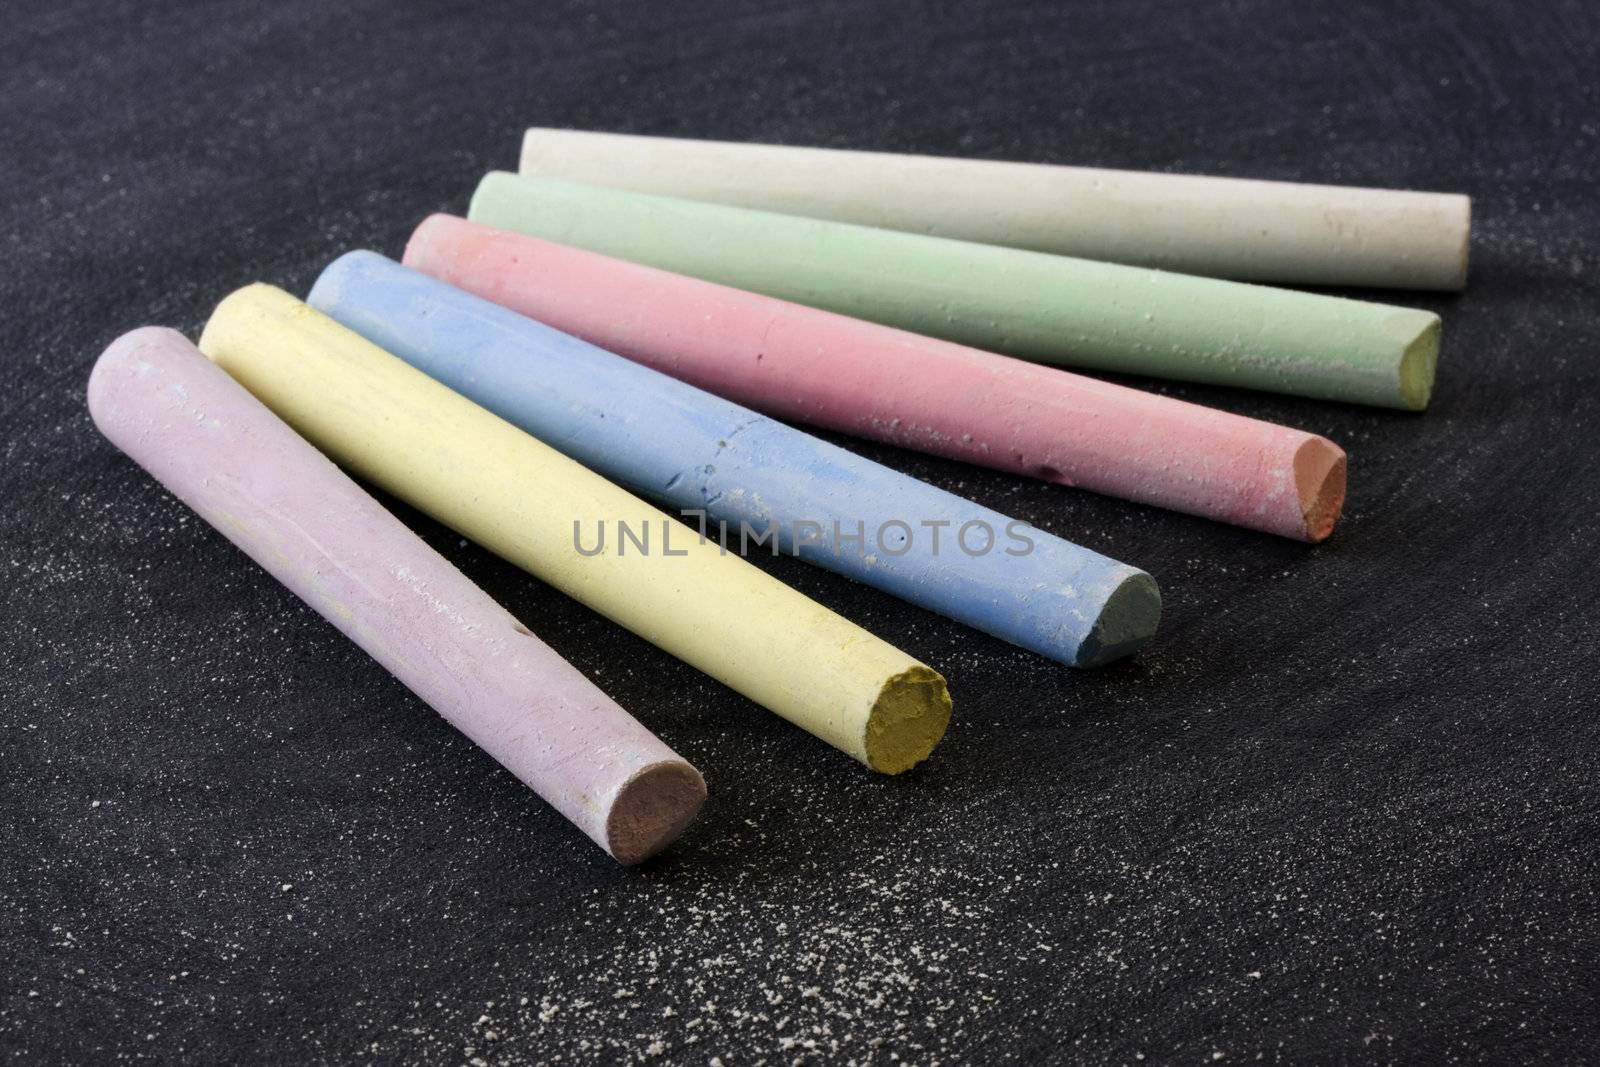 6 pieces of chalk in different color on balckboard with dust and eraser smudges